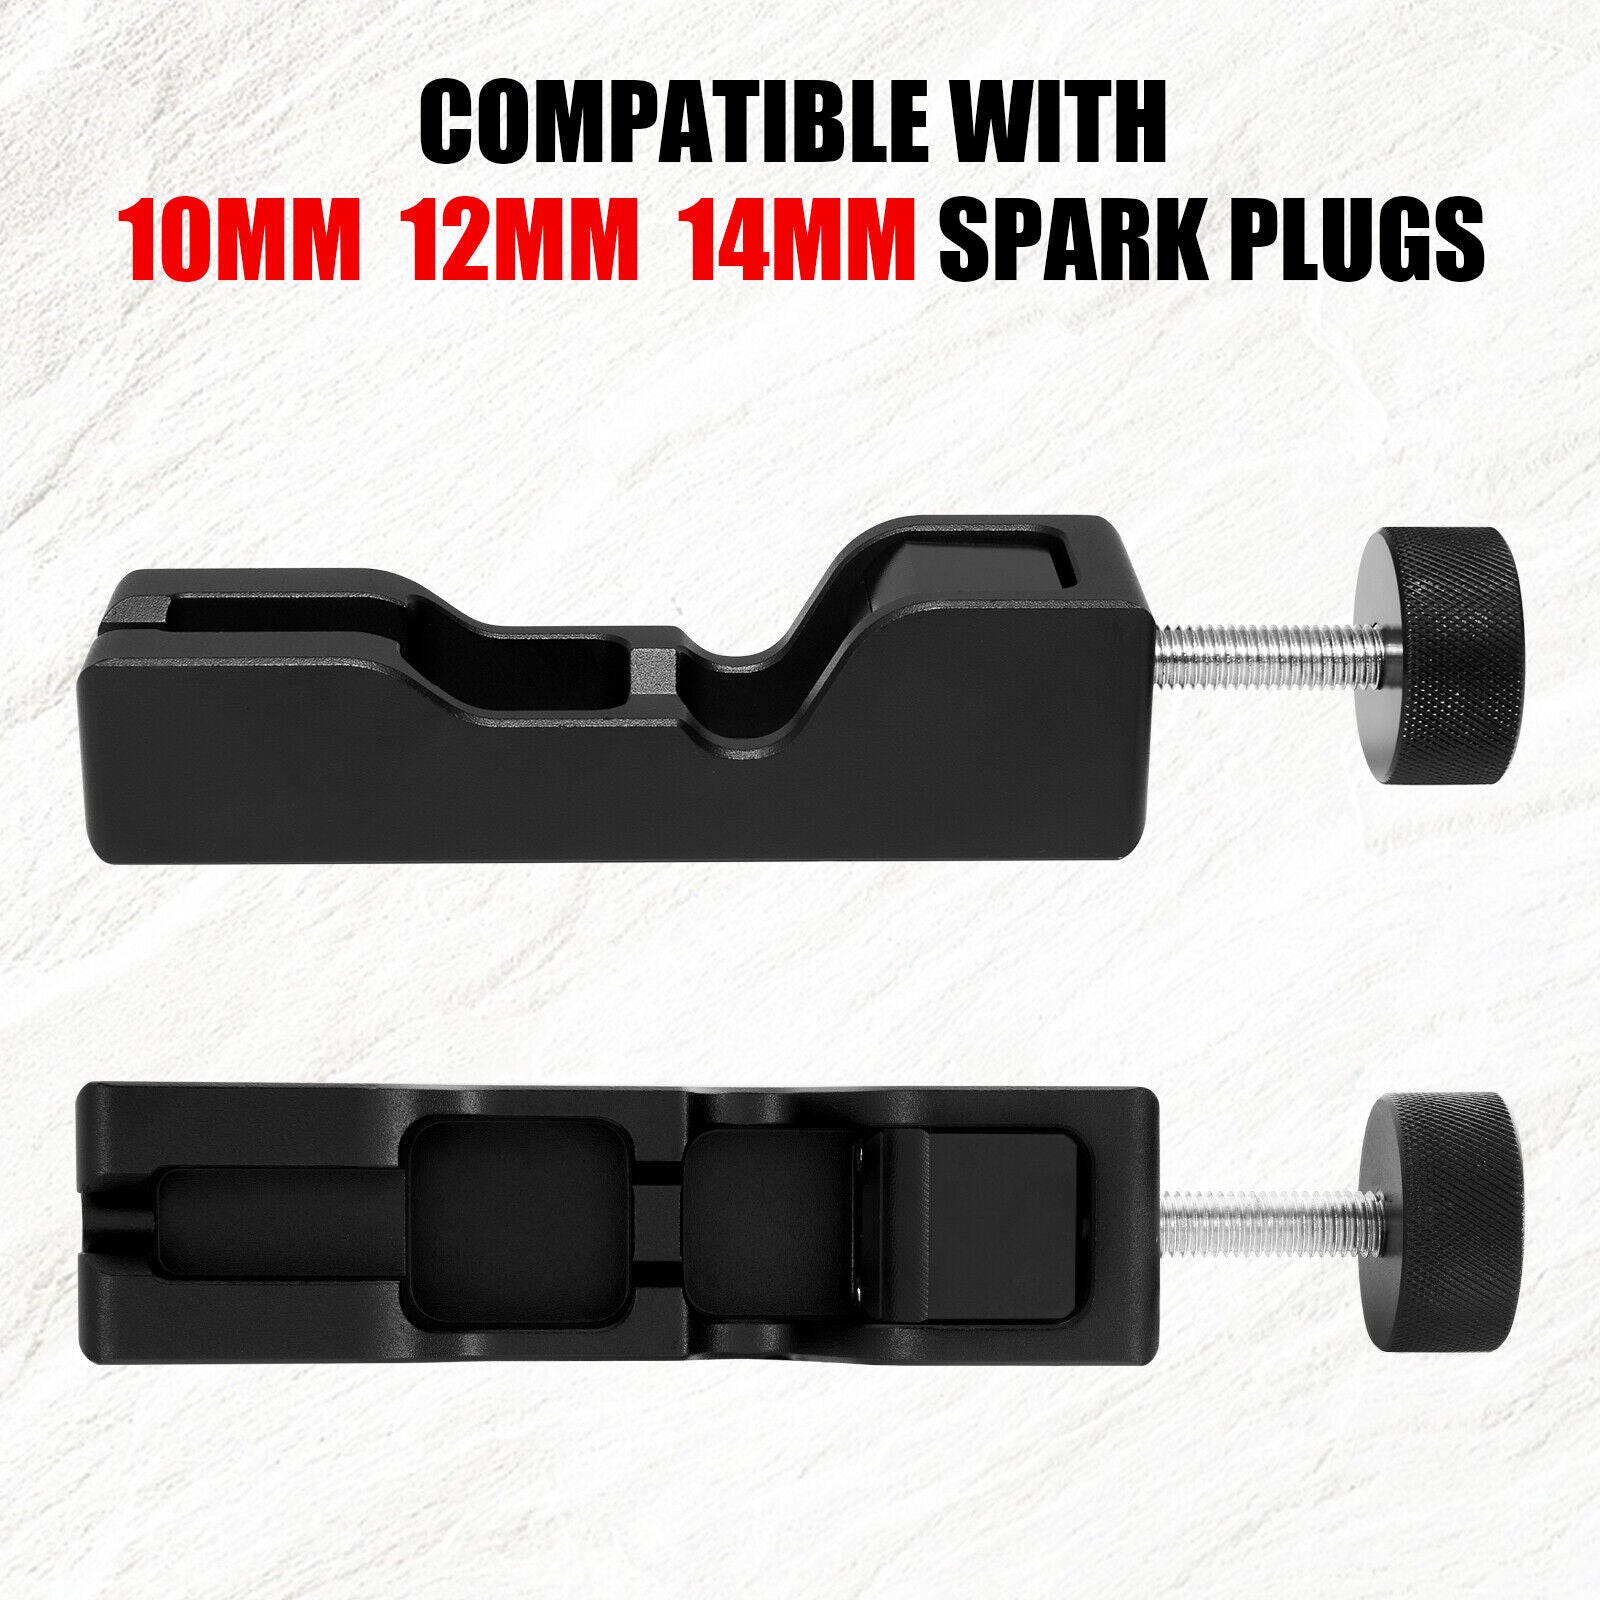 Universal Spark Plug Gap Caliper Tool For Most 10mm 12mm 14mm 16mm Spark Plugs